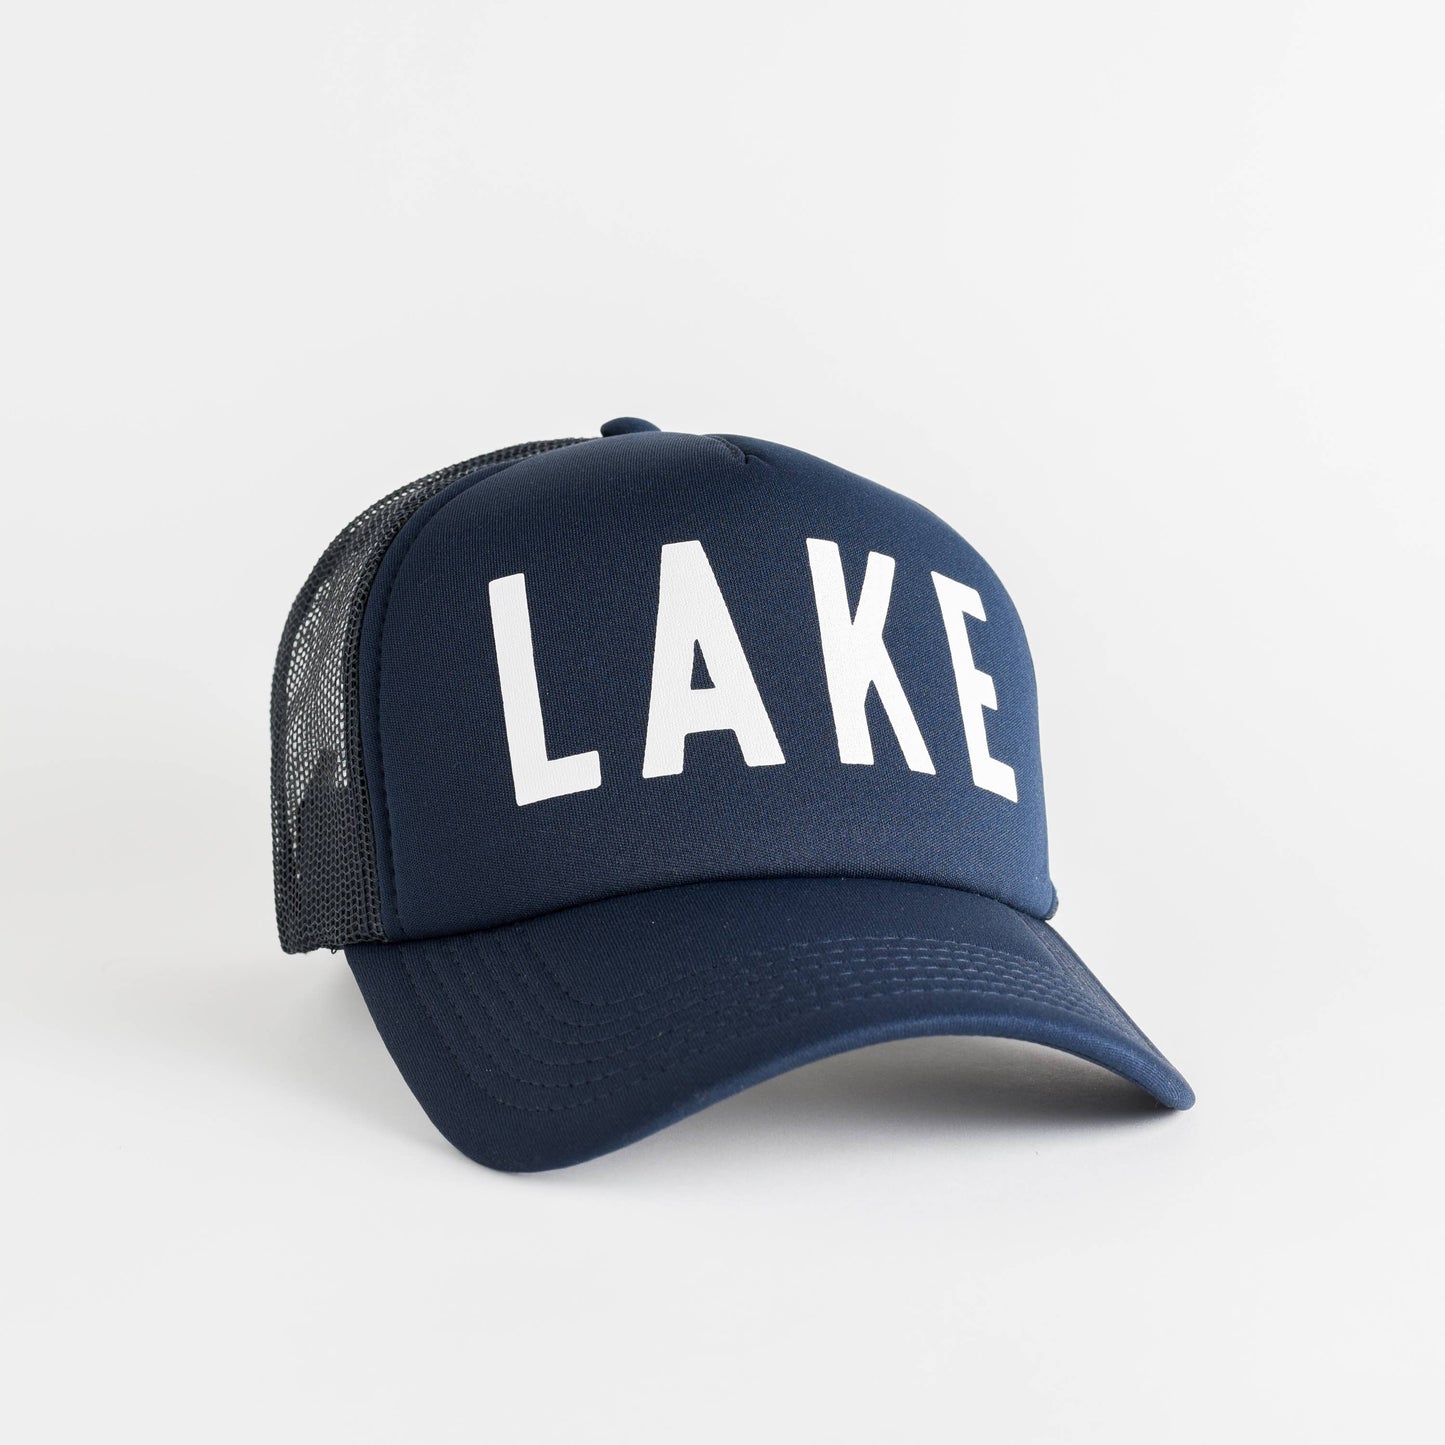 Lake Recycled Woman's Trucker Hat - navy